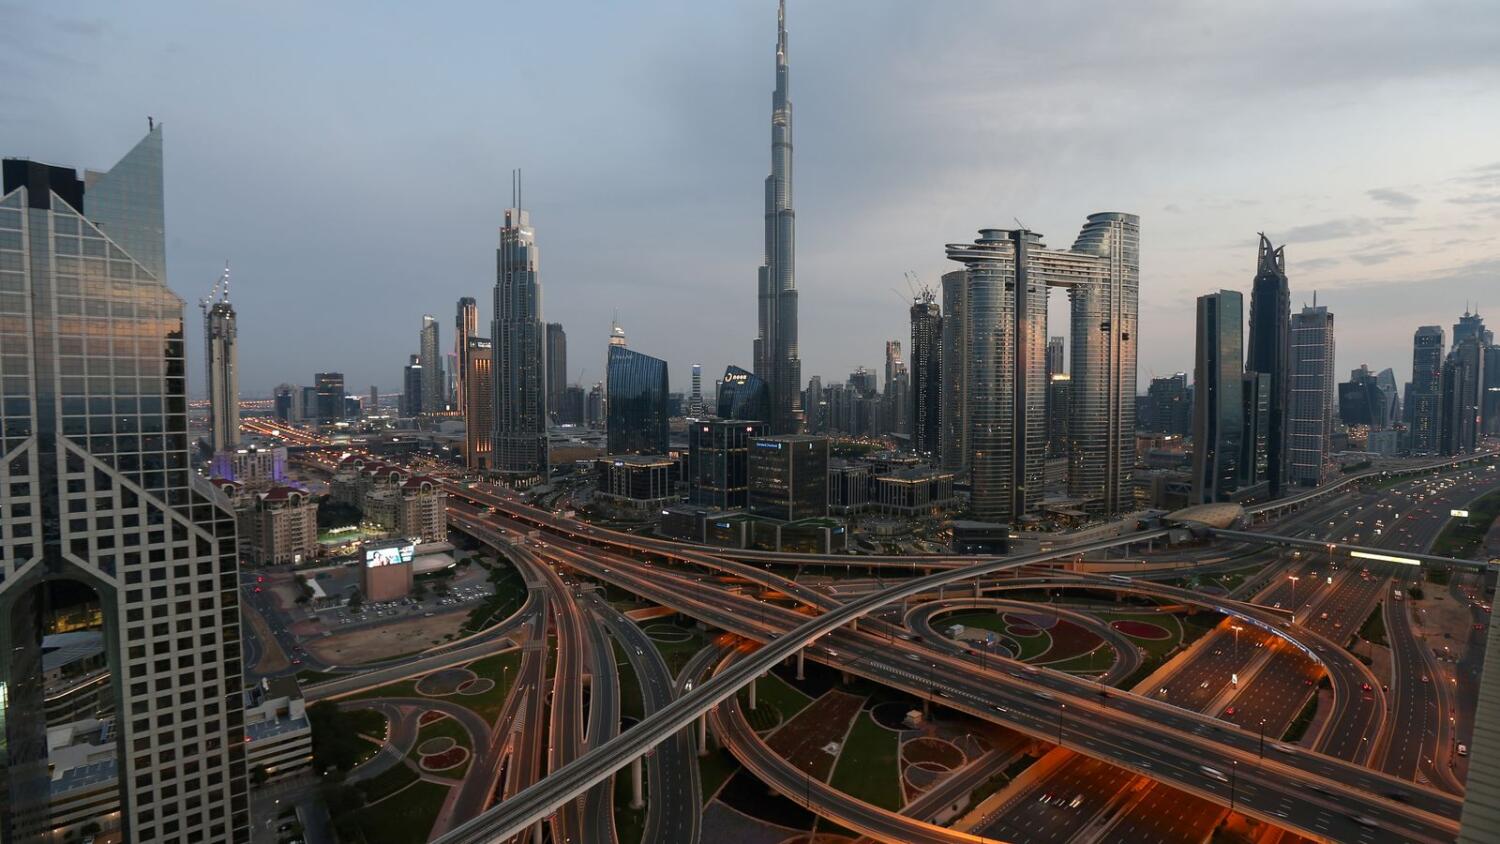 Dubai realty bets on sustainable recovery